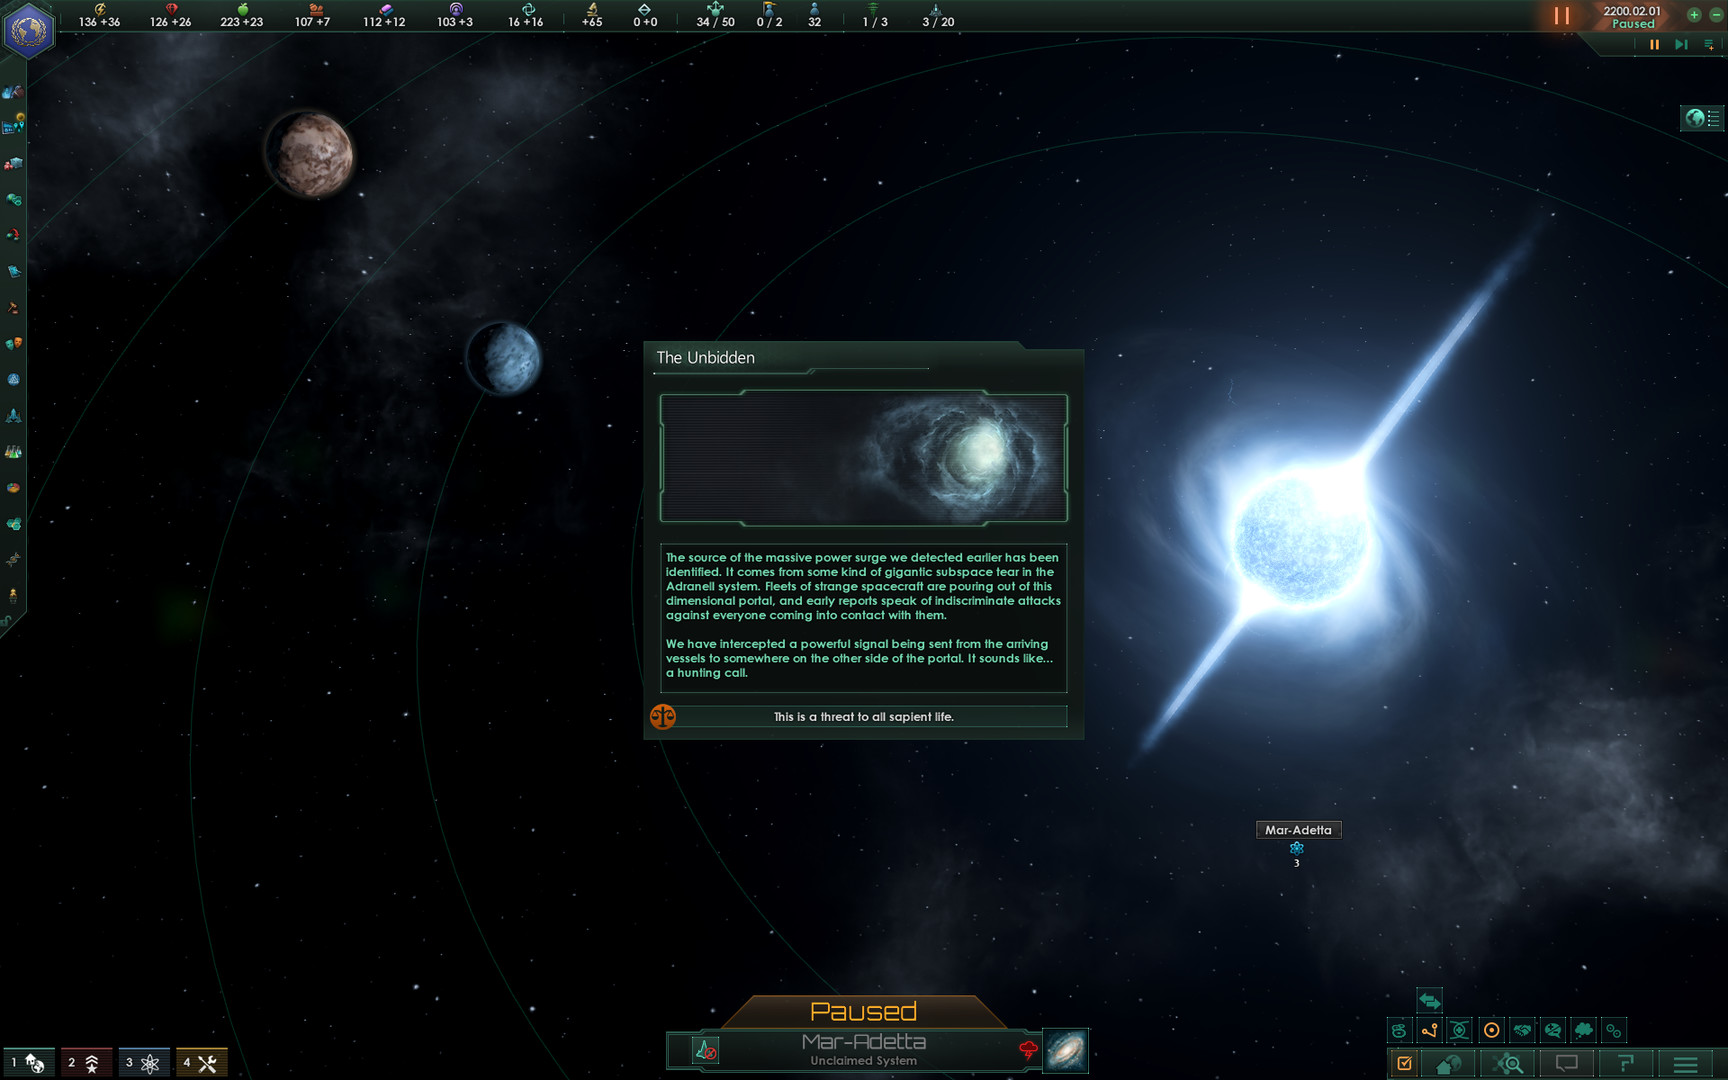 i allow universal access for stellaris on mac